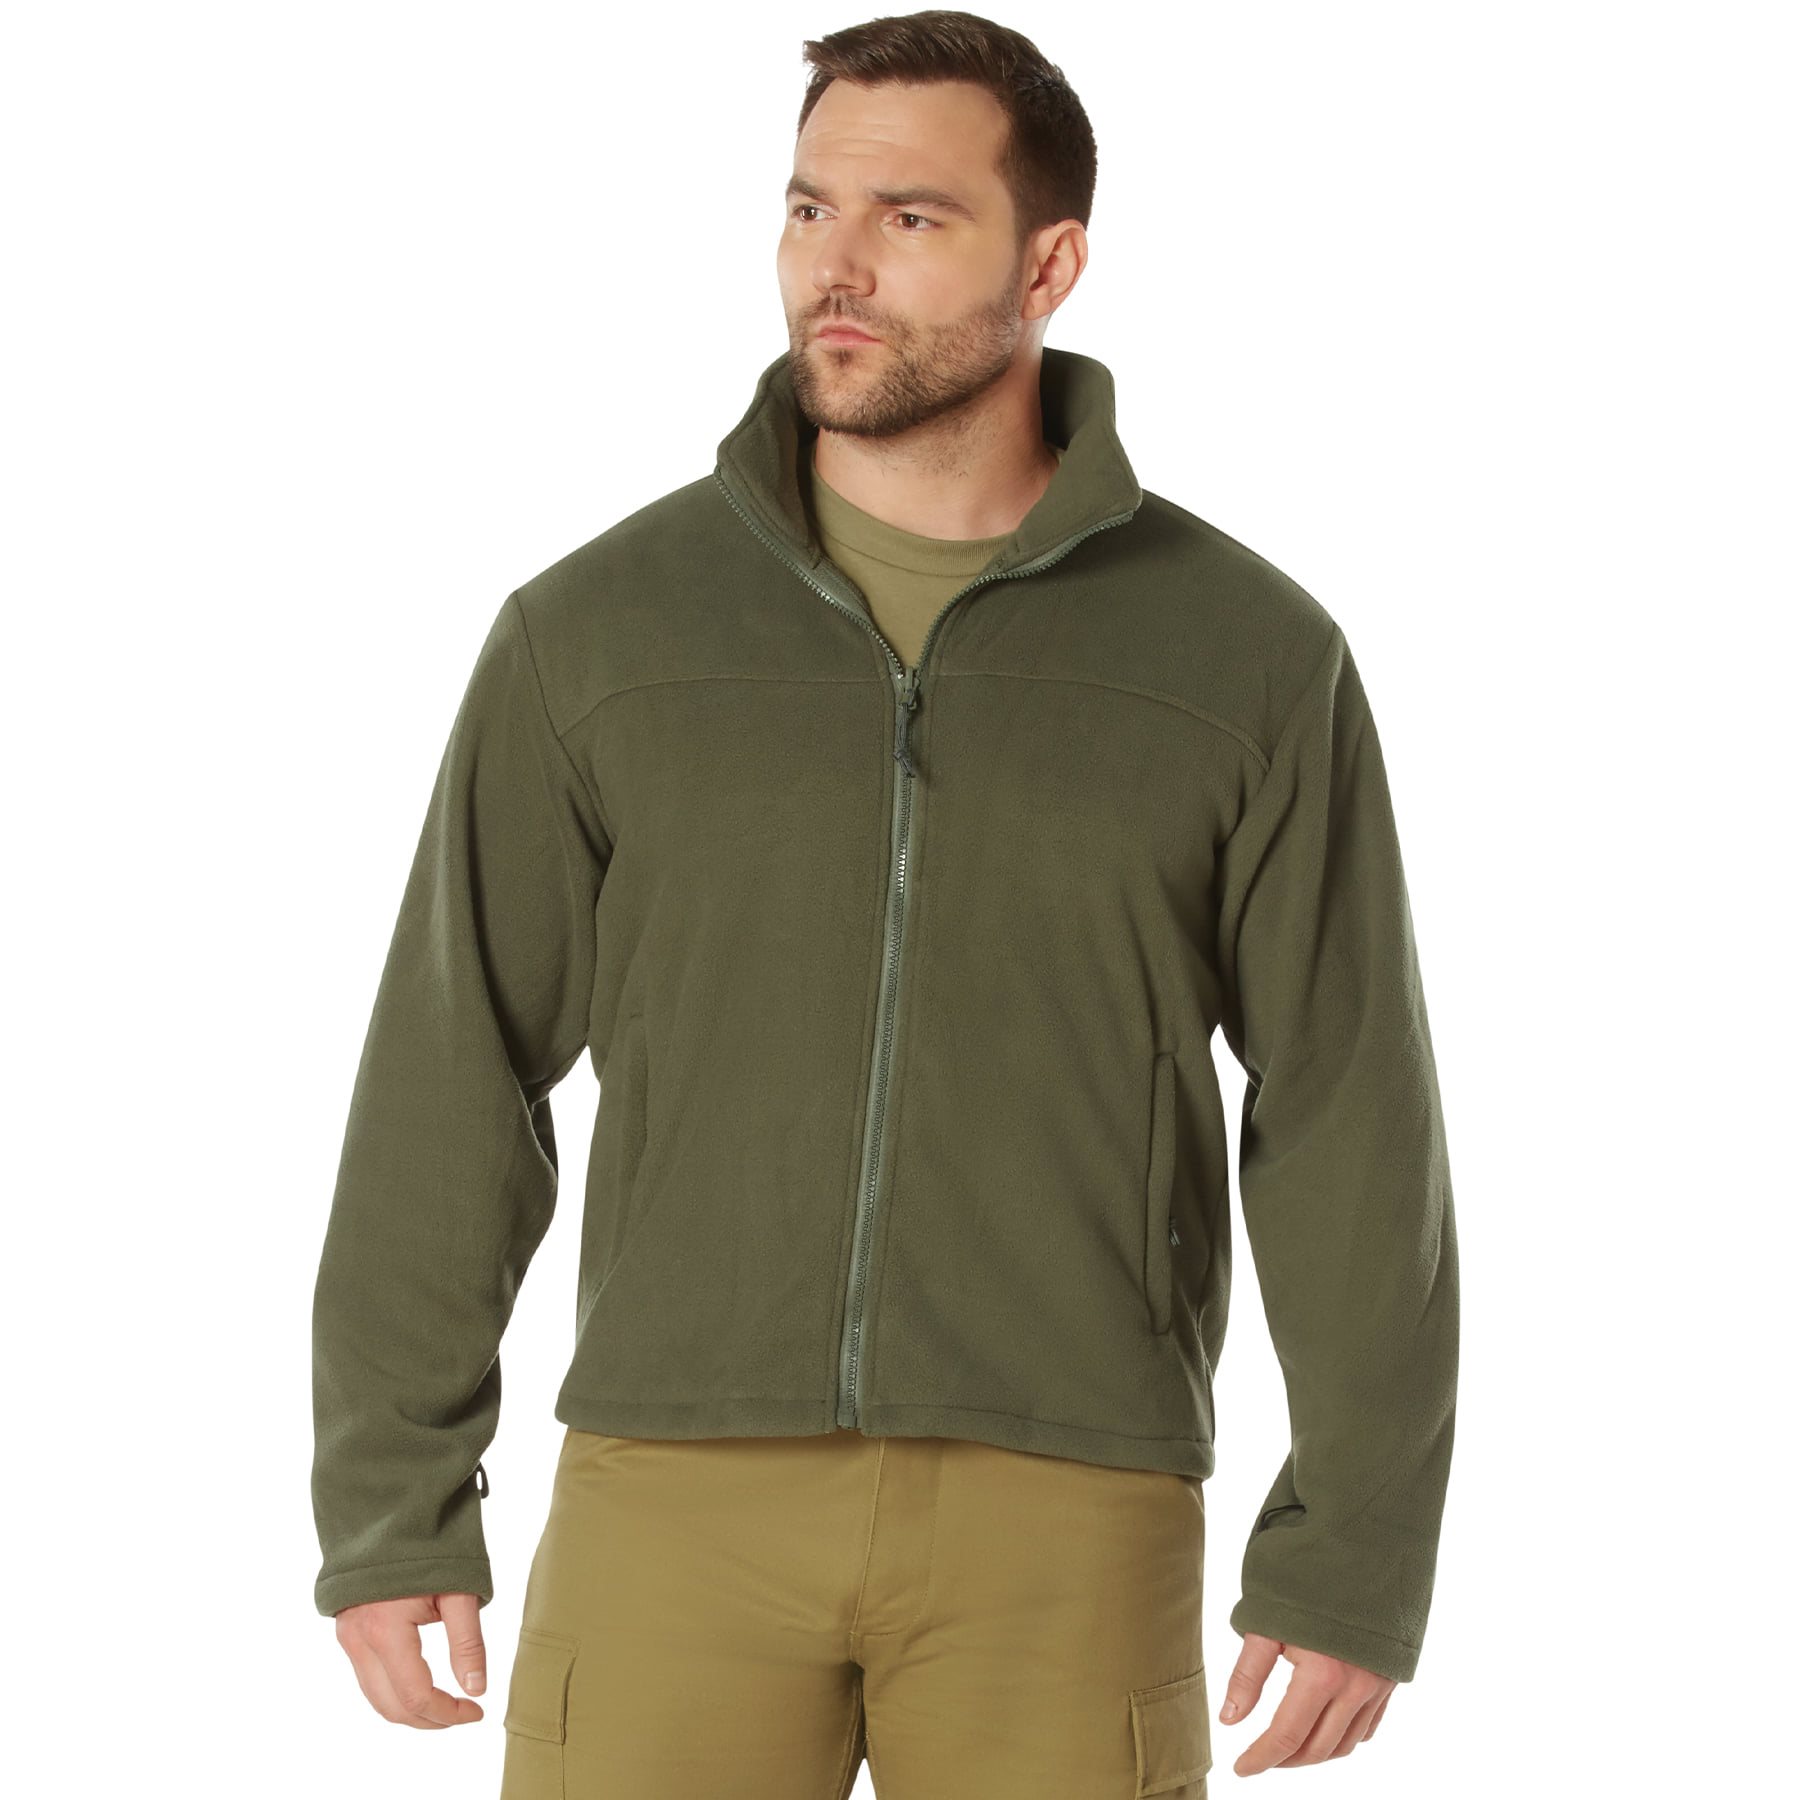 ROTHCO 3-in-1 Spec Ops Soft Shell Jacket OLIVE DRAB | Army surplus ...